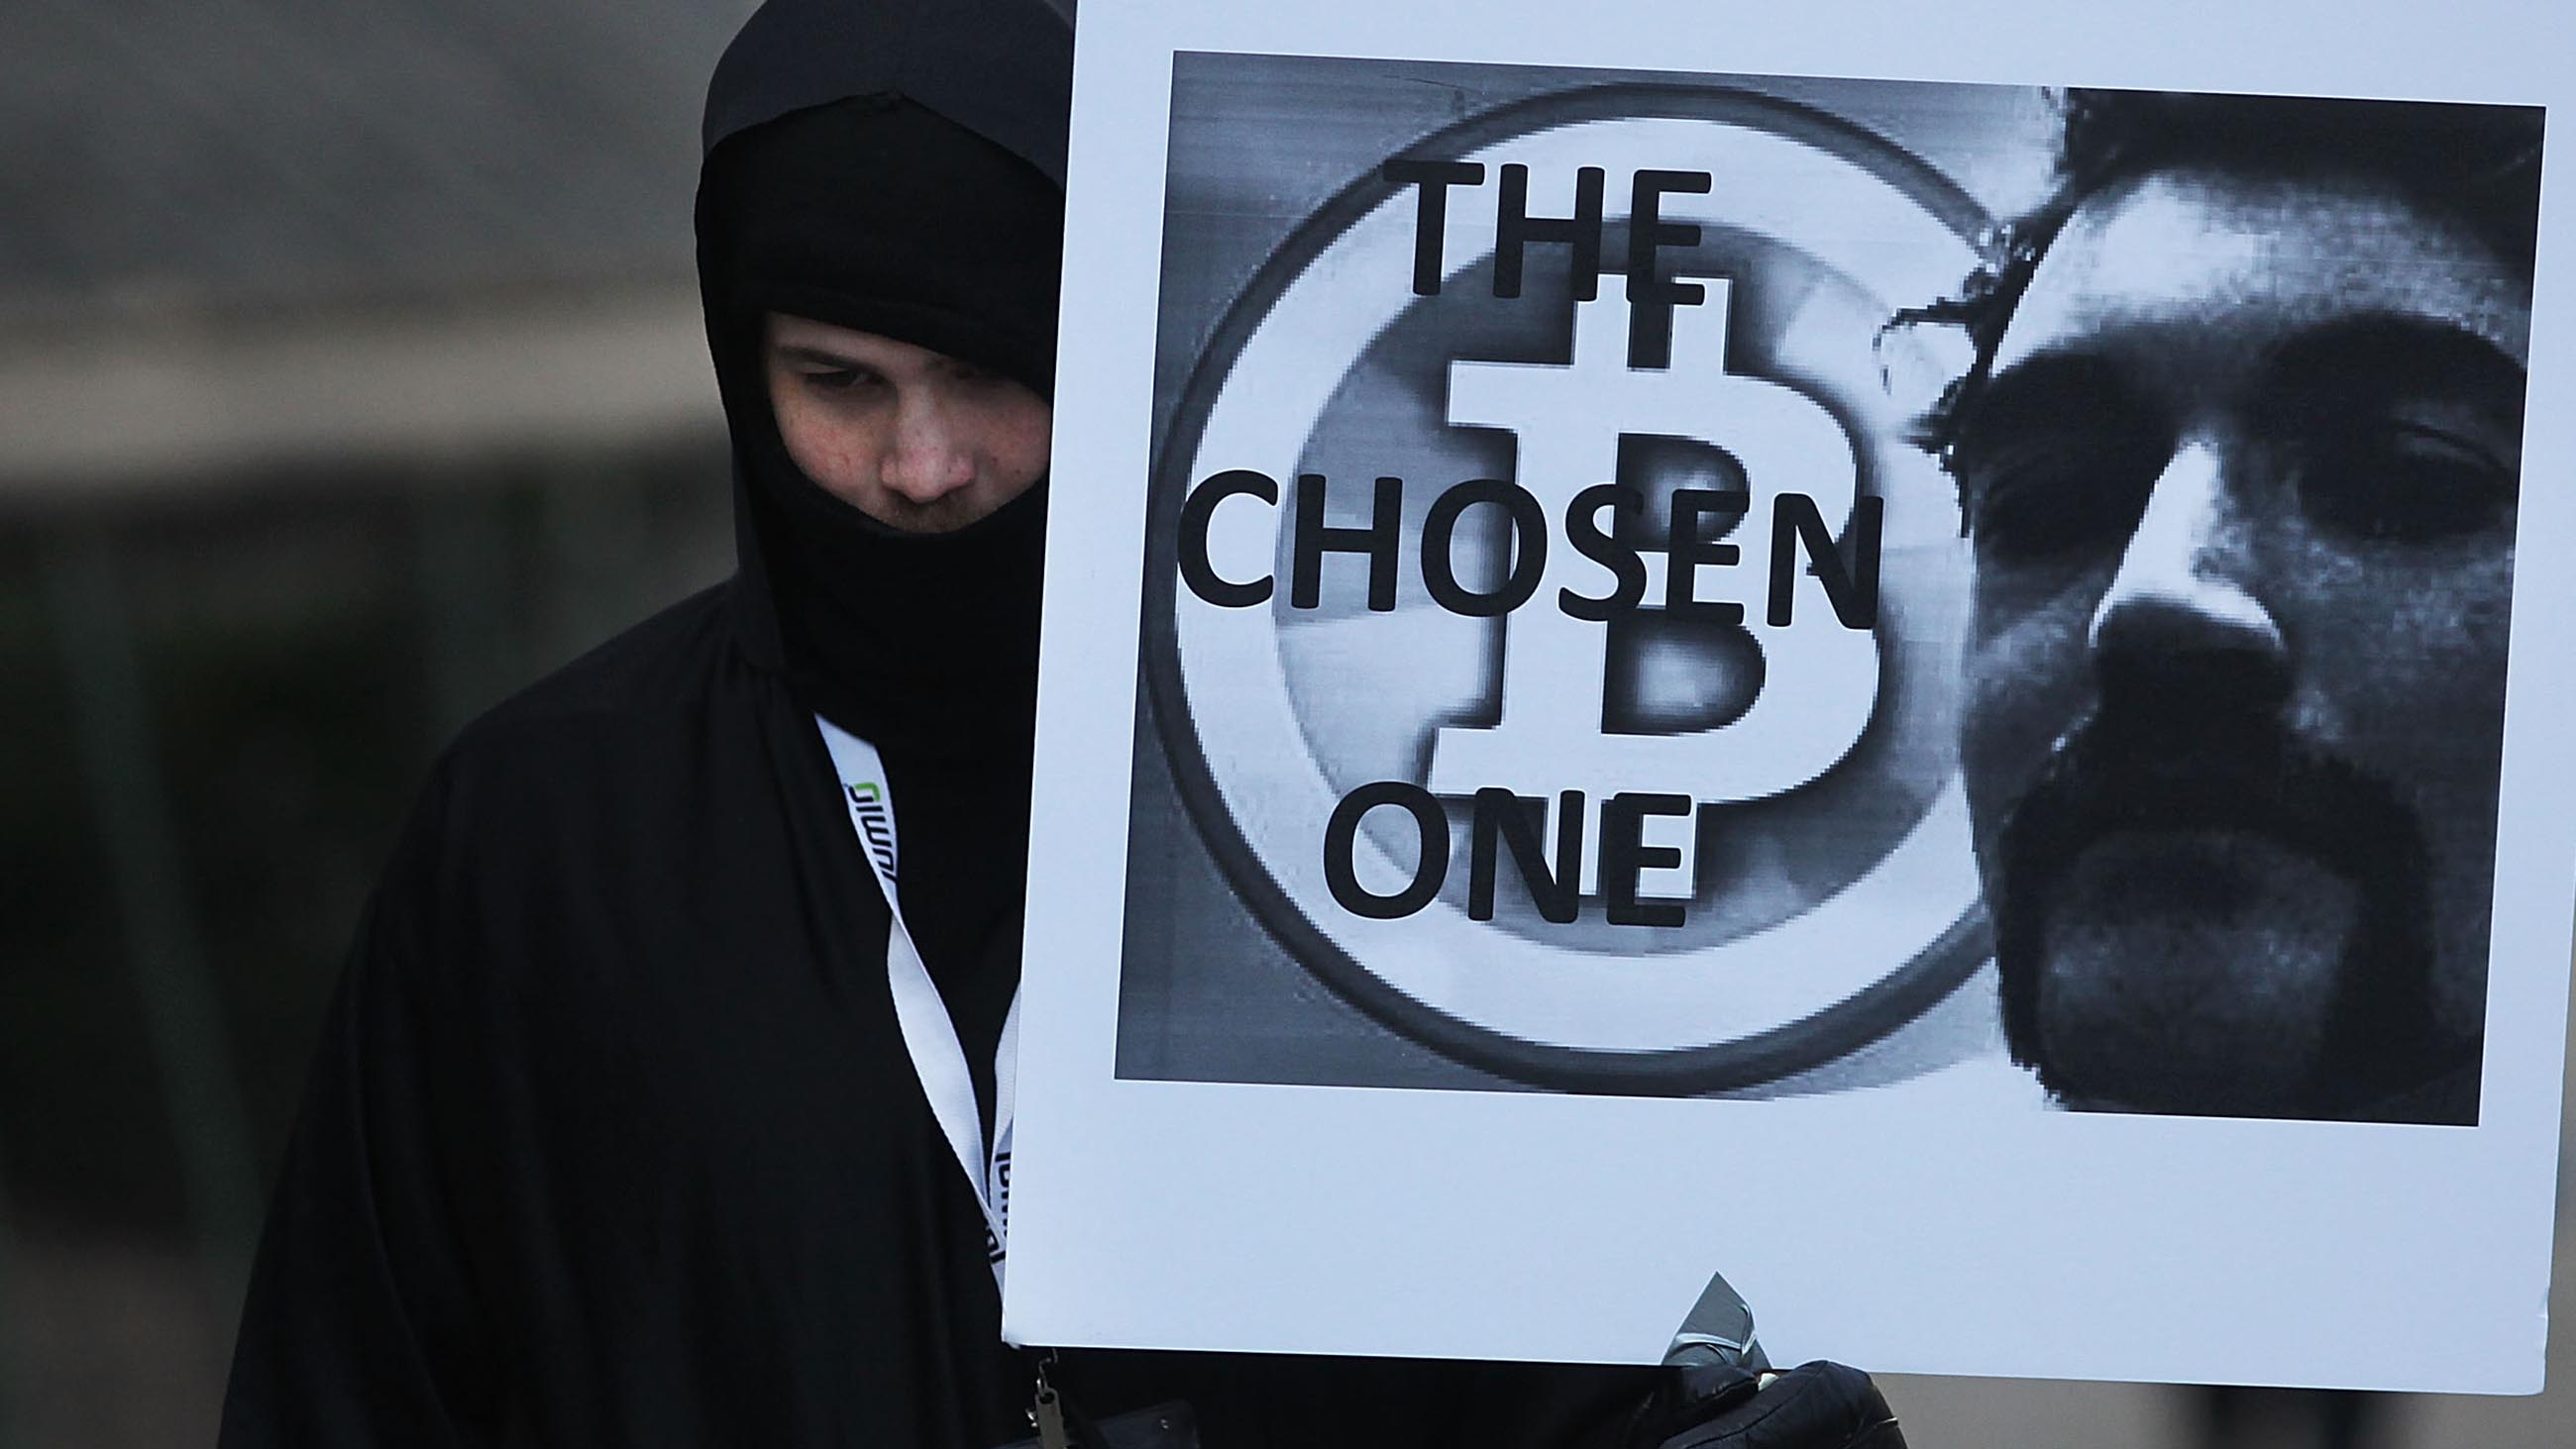 "Free Ross": A supporter of the Silk Road tycoon Ross Ulbricht outside his trial in New York.